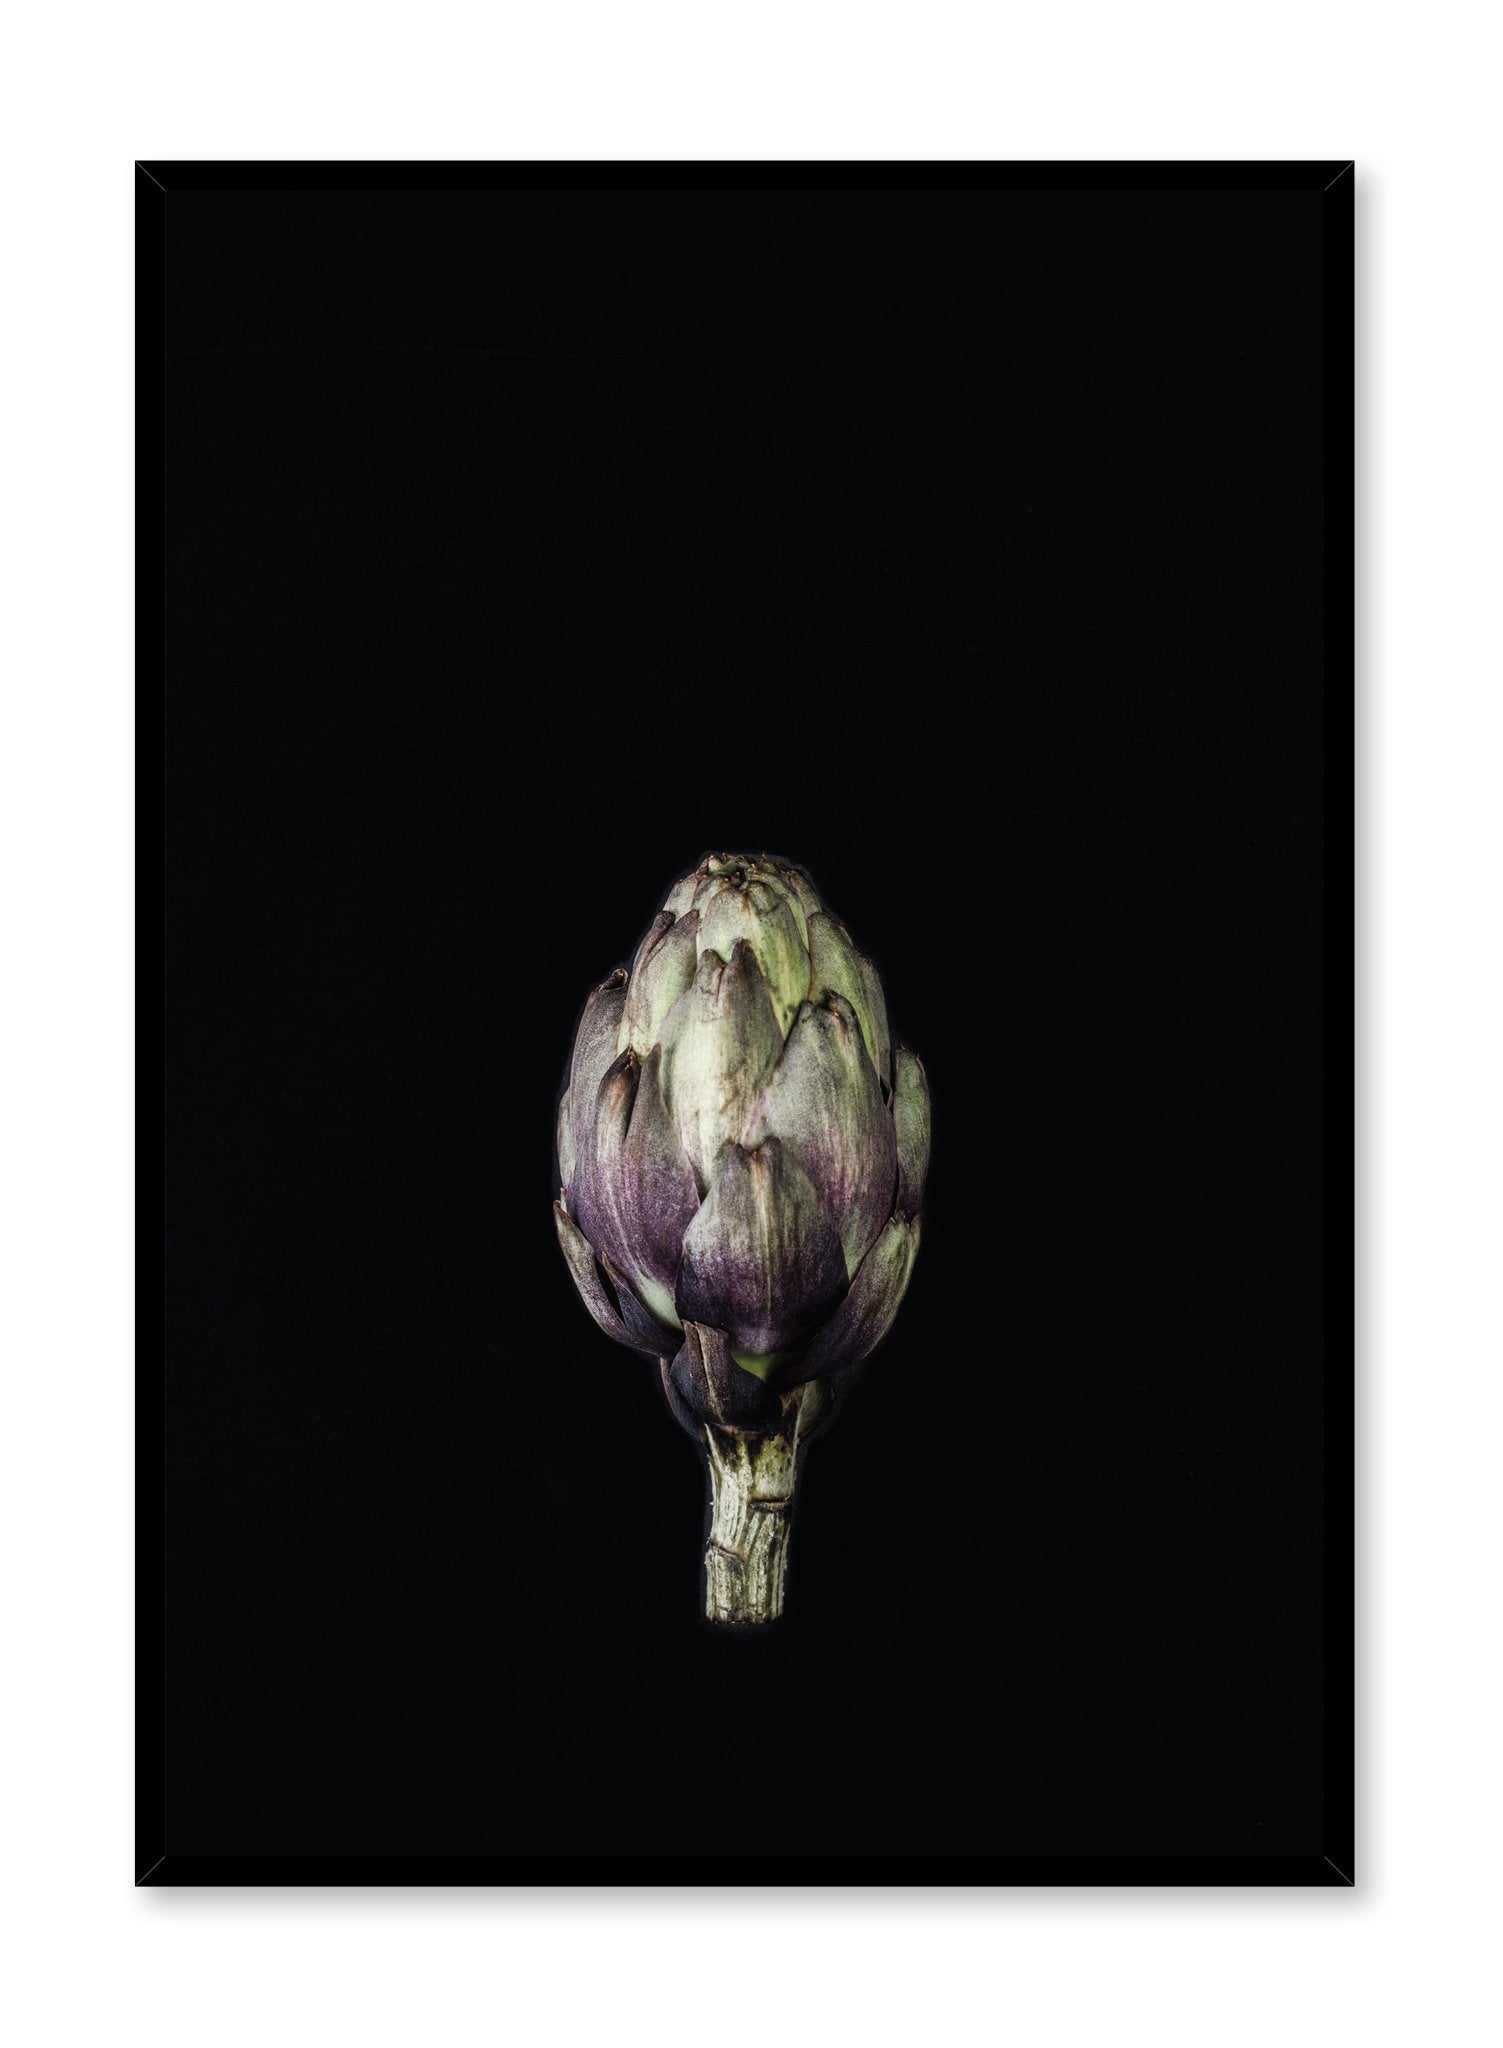 Minimalist poster by Opposite Wall with Globe on Black artichoke photography